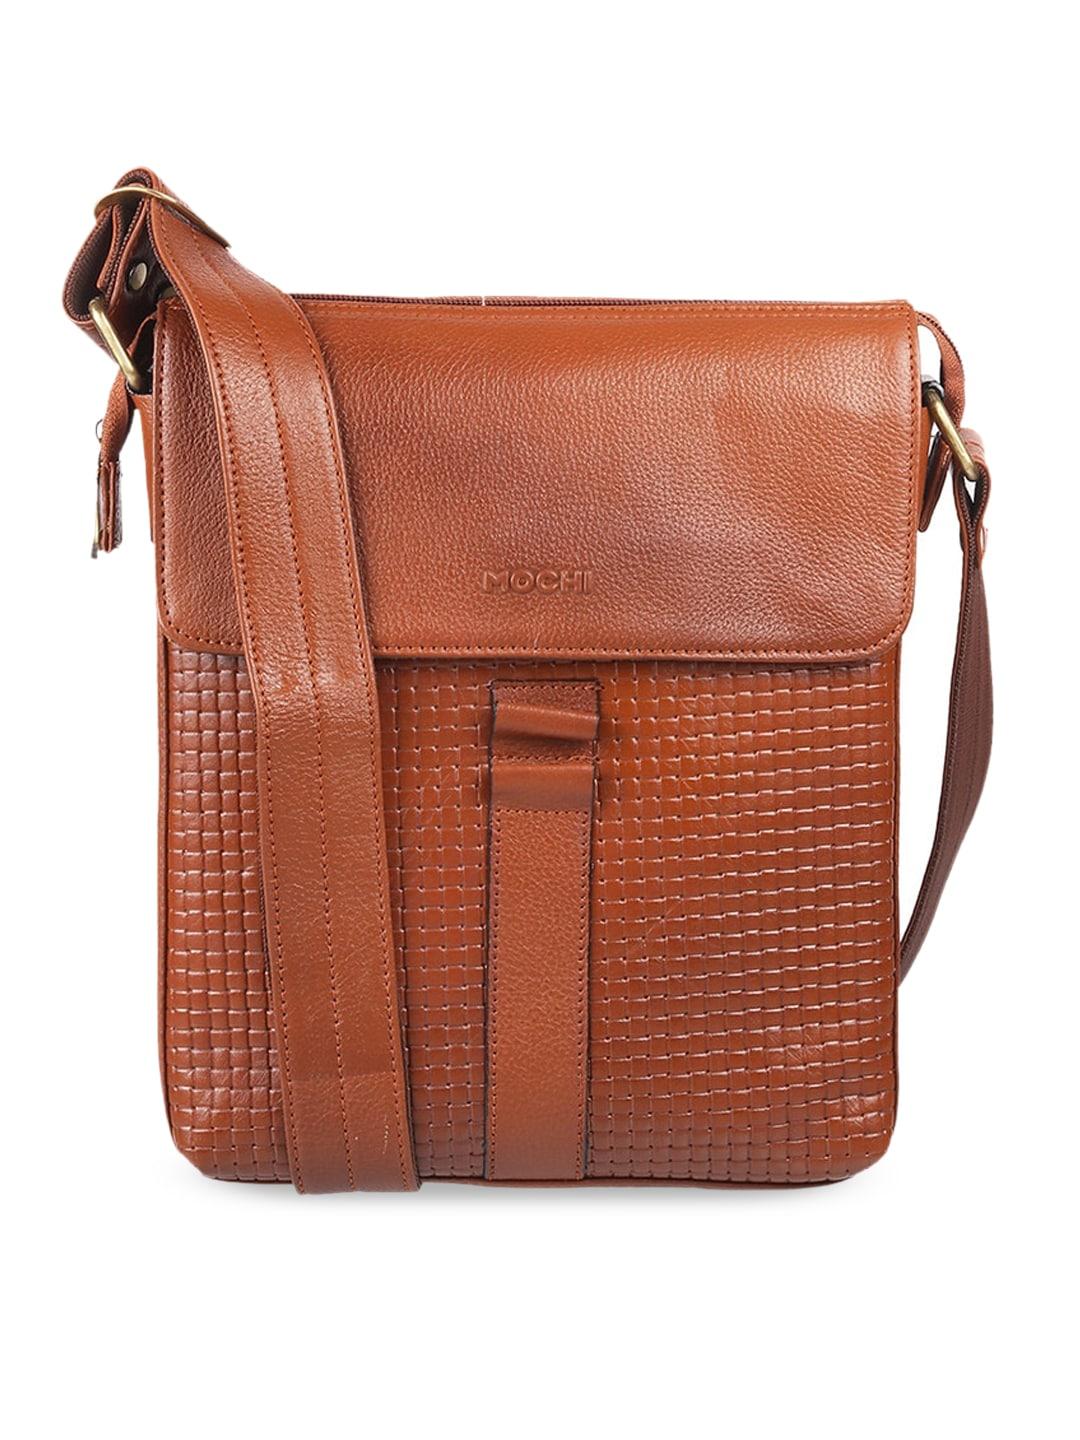 Mochi Tan Textured Leather Structured Sling Bag with Cut Work